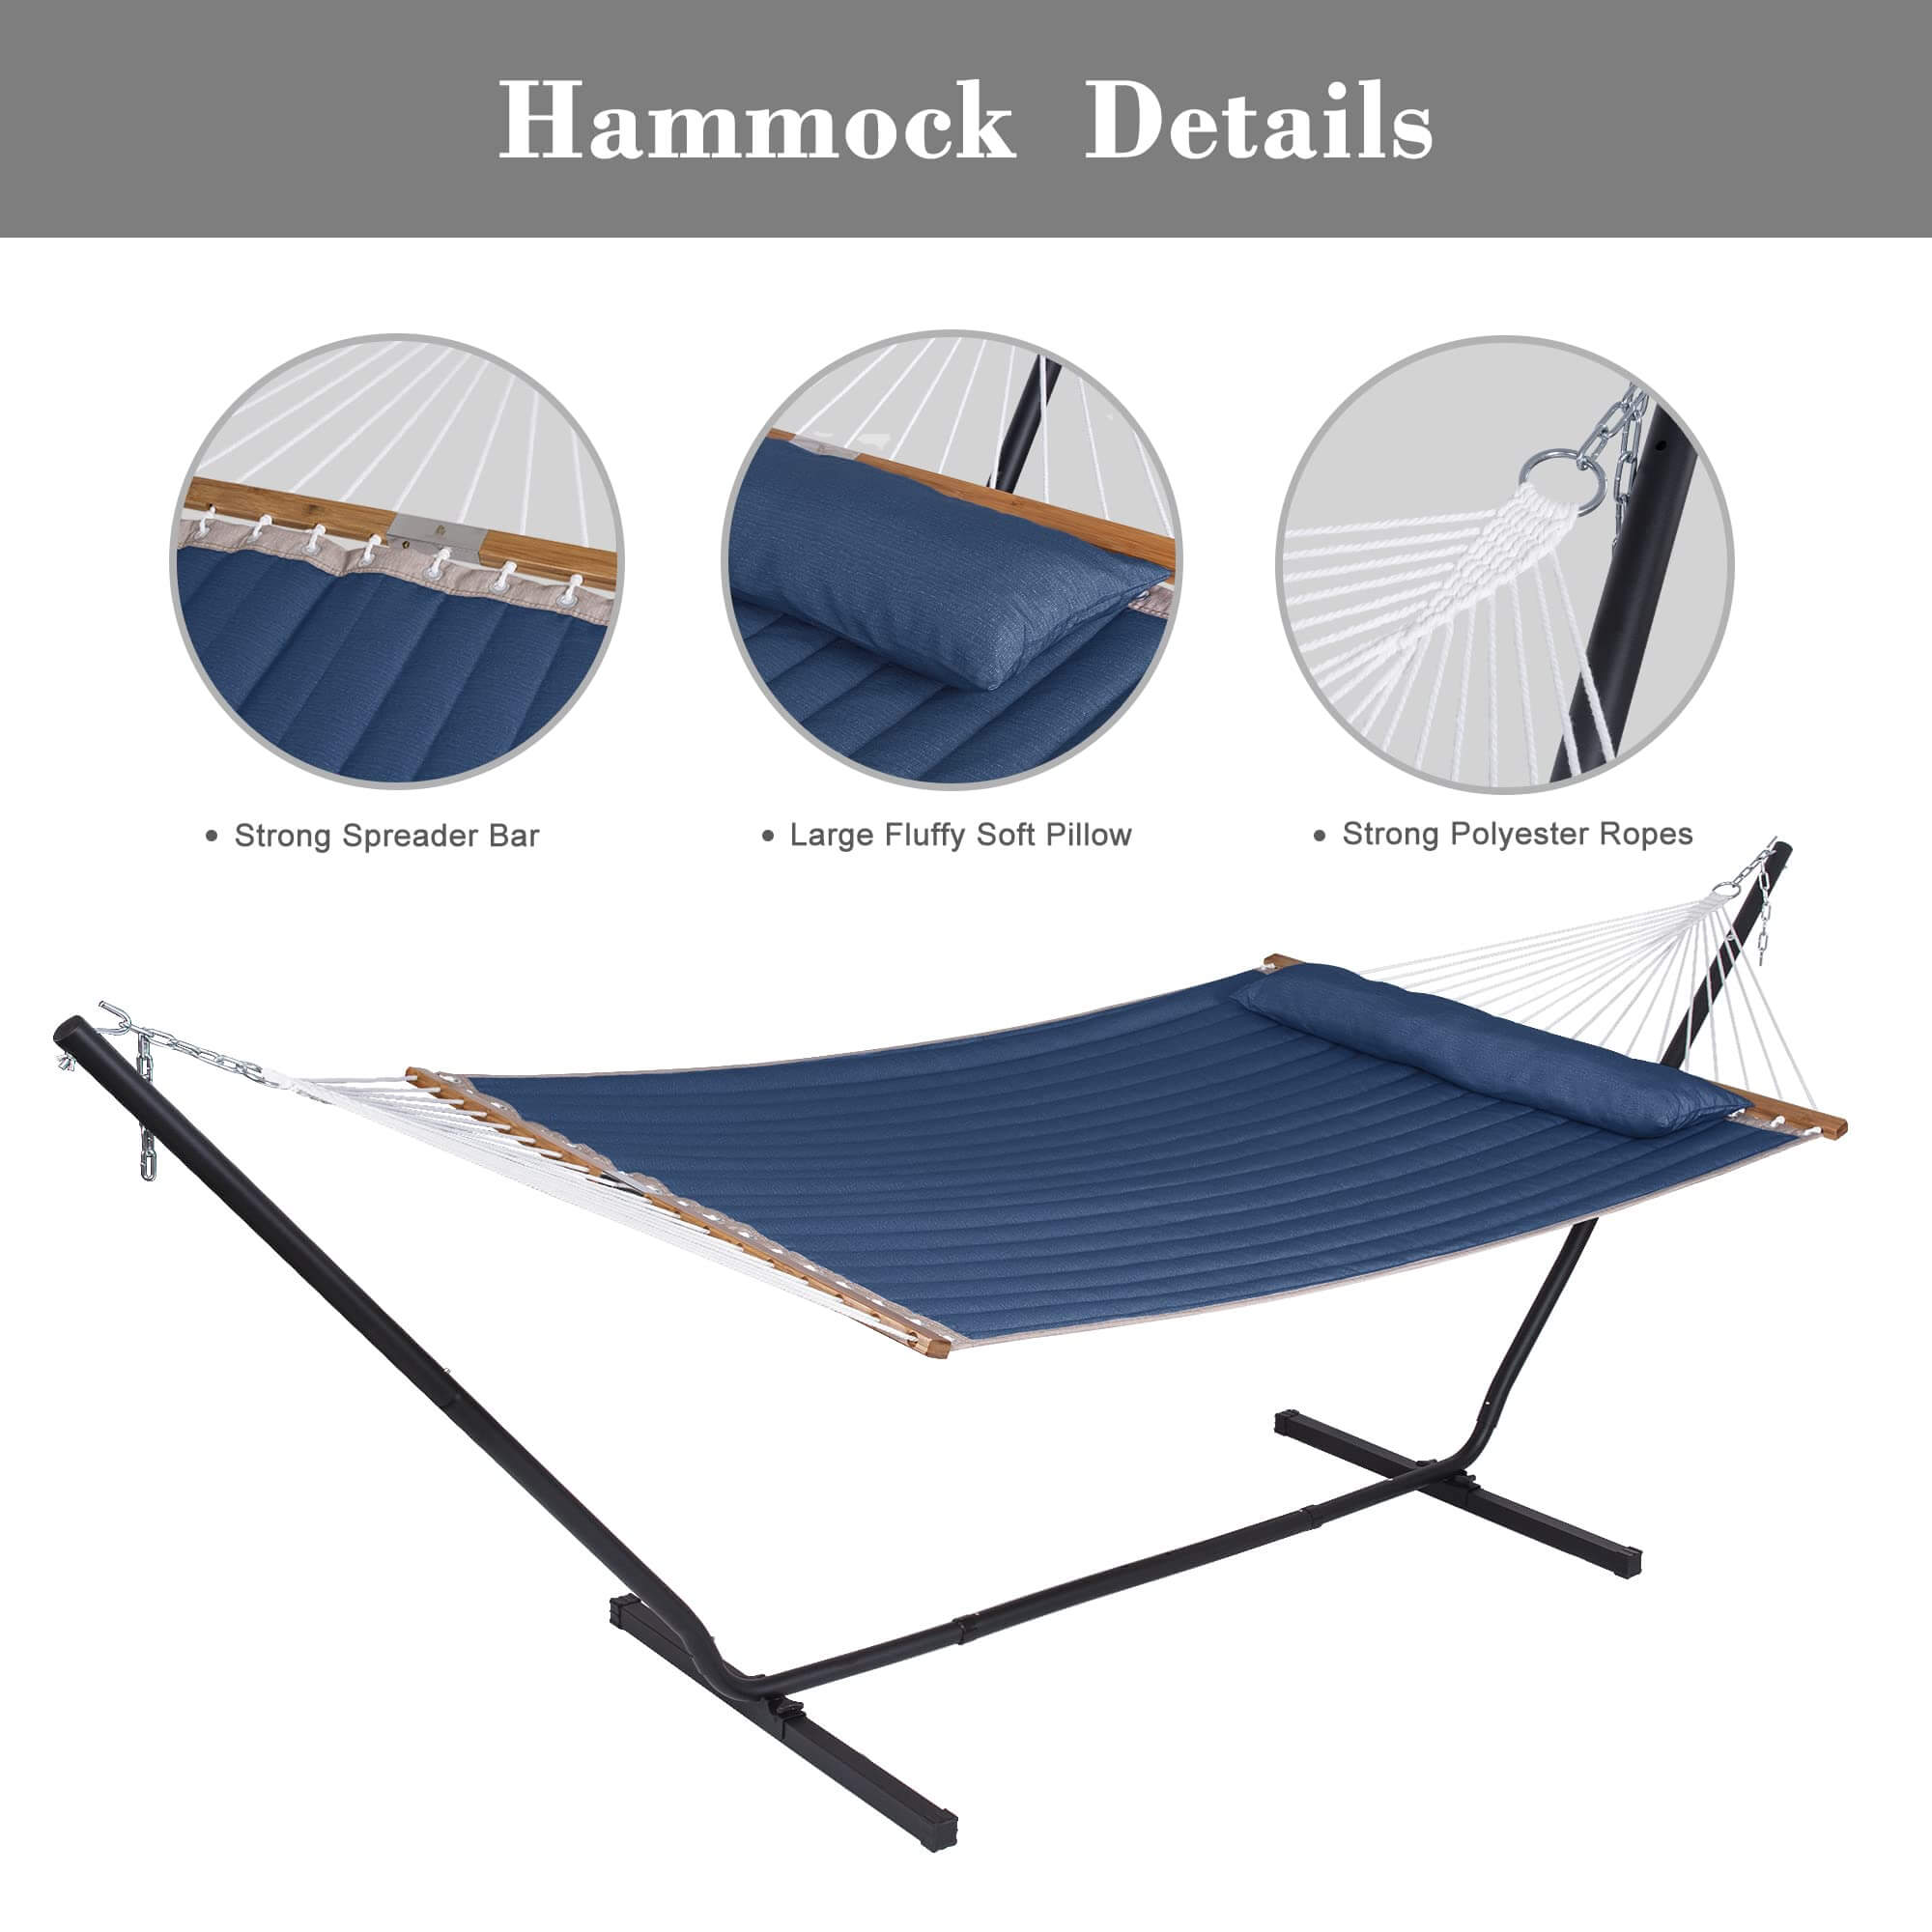 SUNCREAT-2-in-1-Stand-Alone-Hammock-and-Stand-for-Backyard-Patio-Garden-Navy-Blue#color_navy-blue